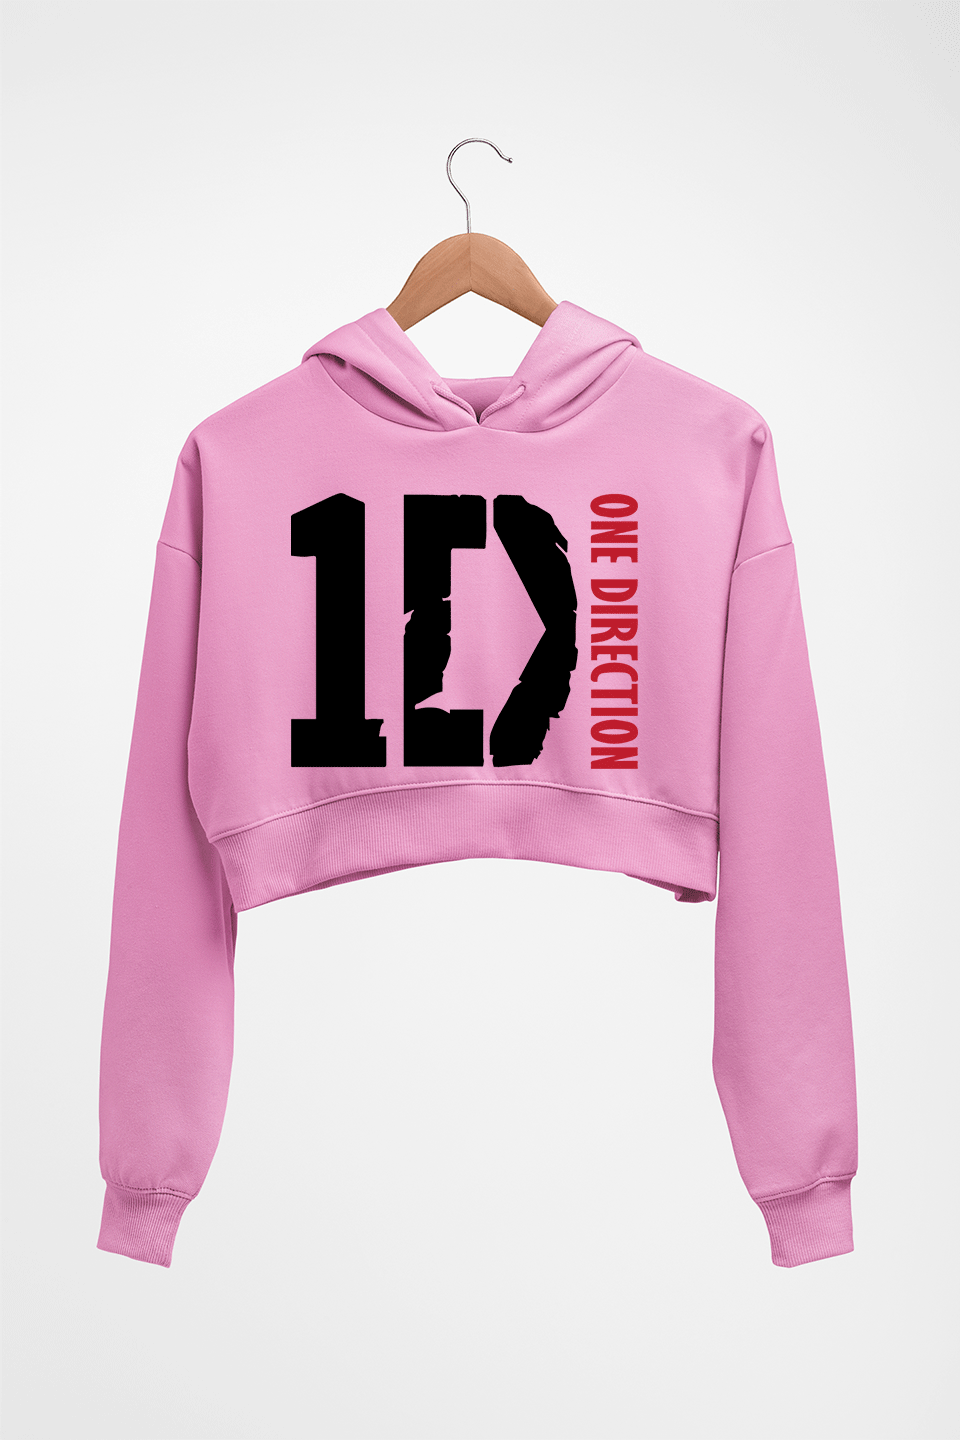 One Direction Crop HOODIE FOR WOMEN